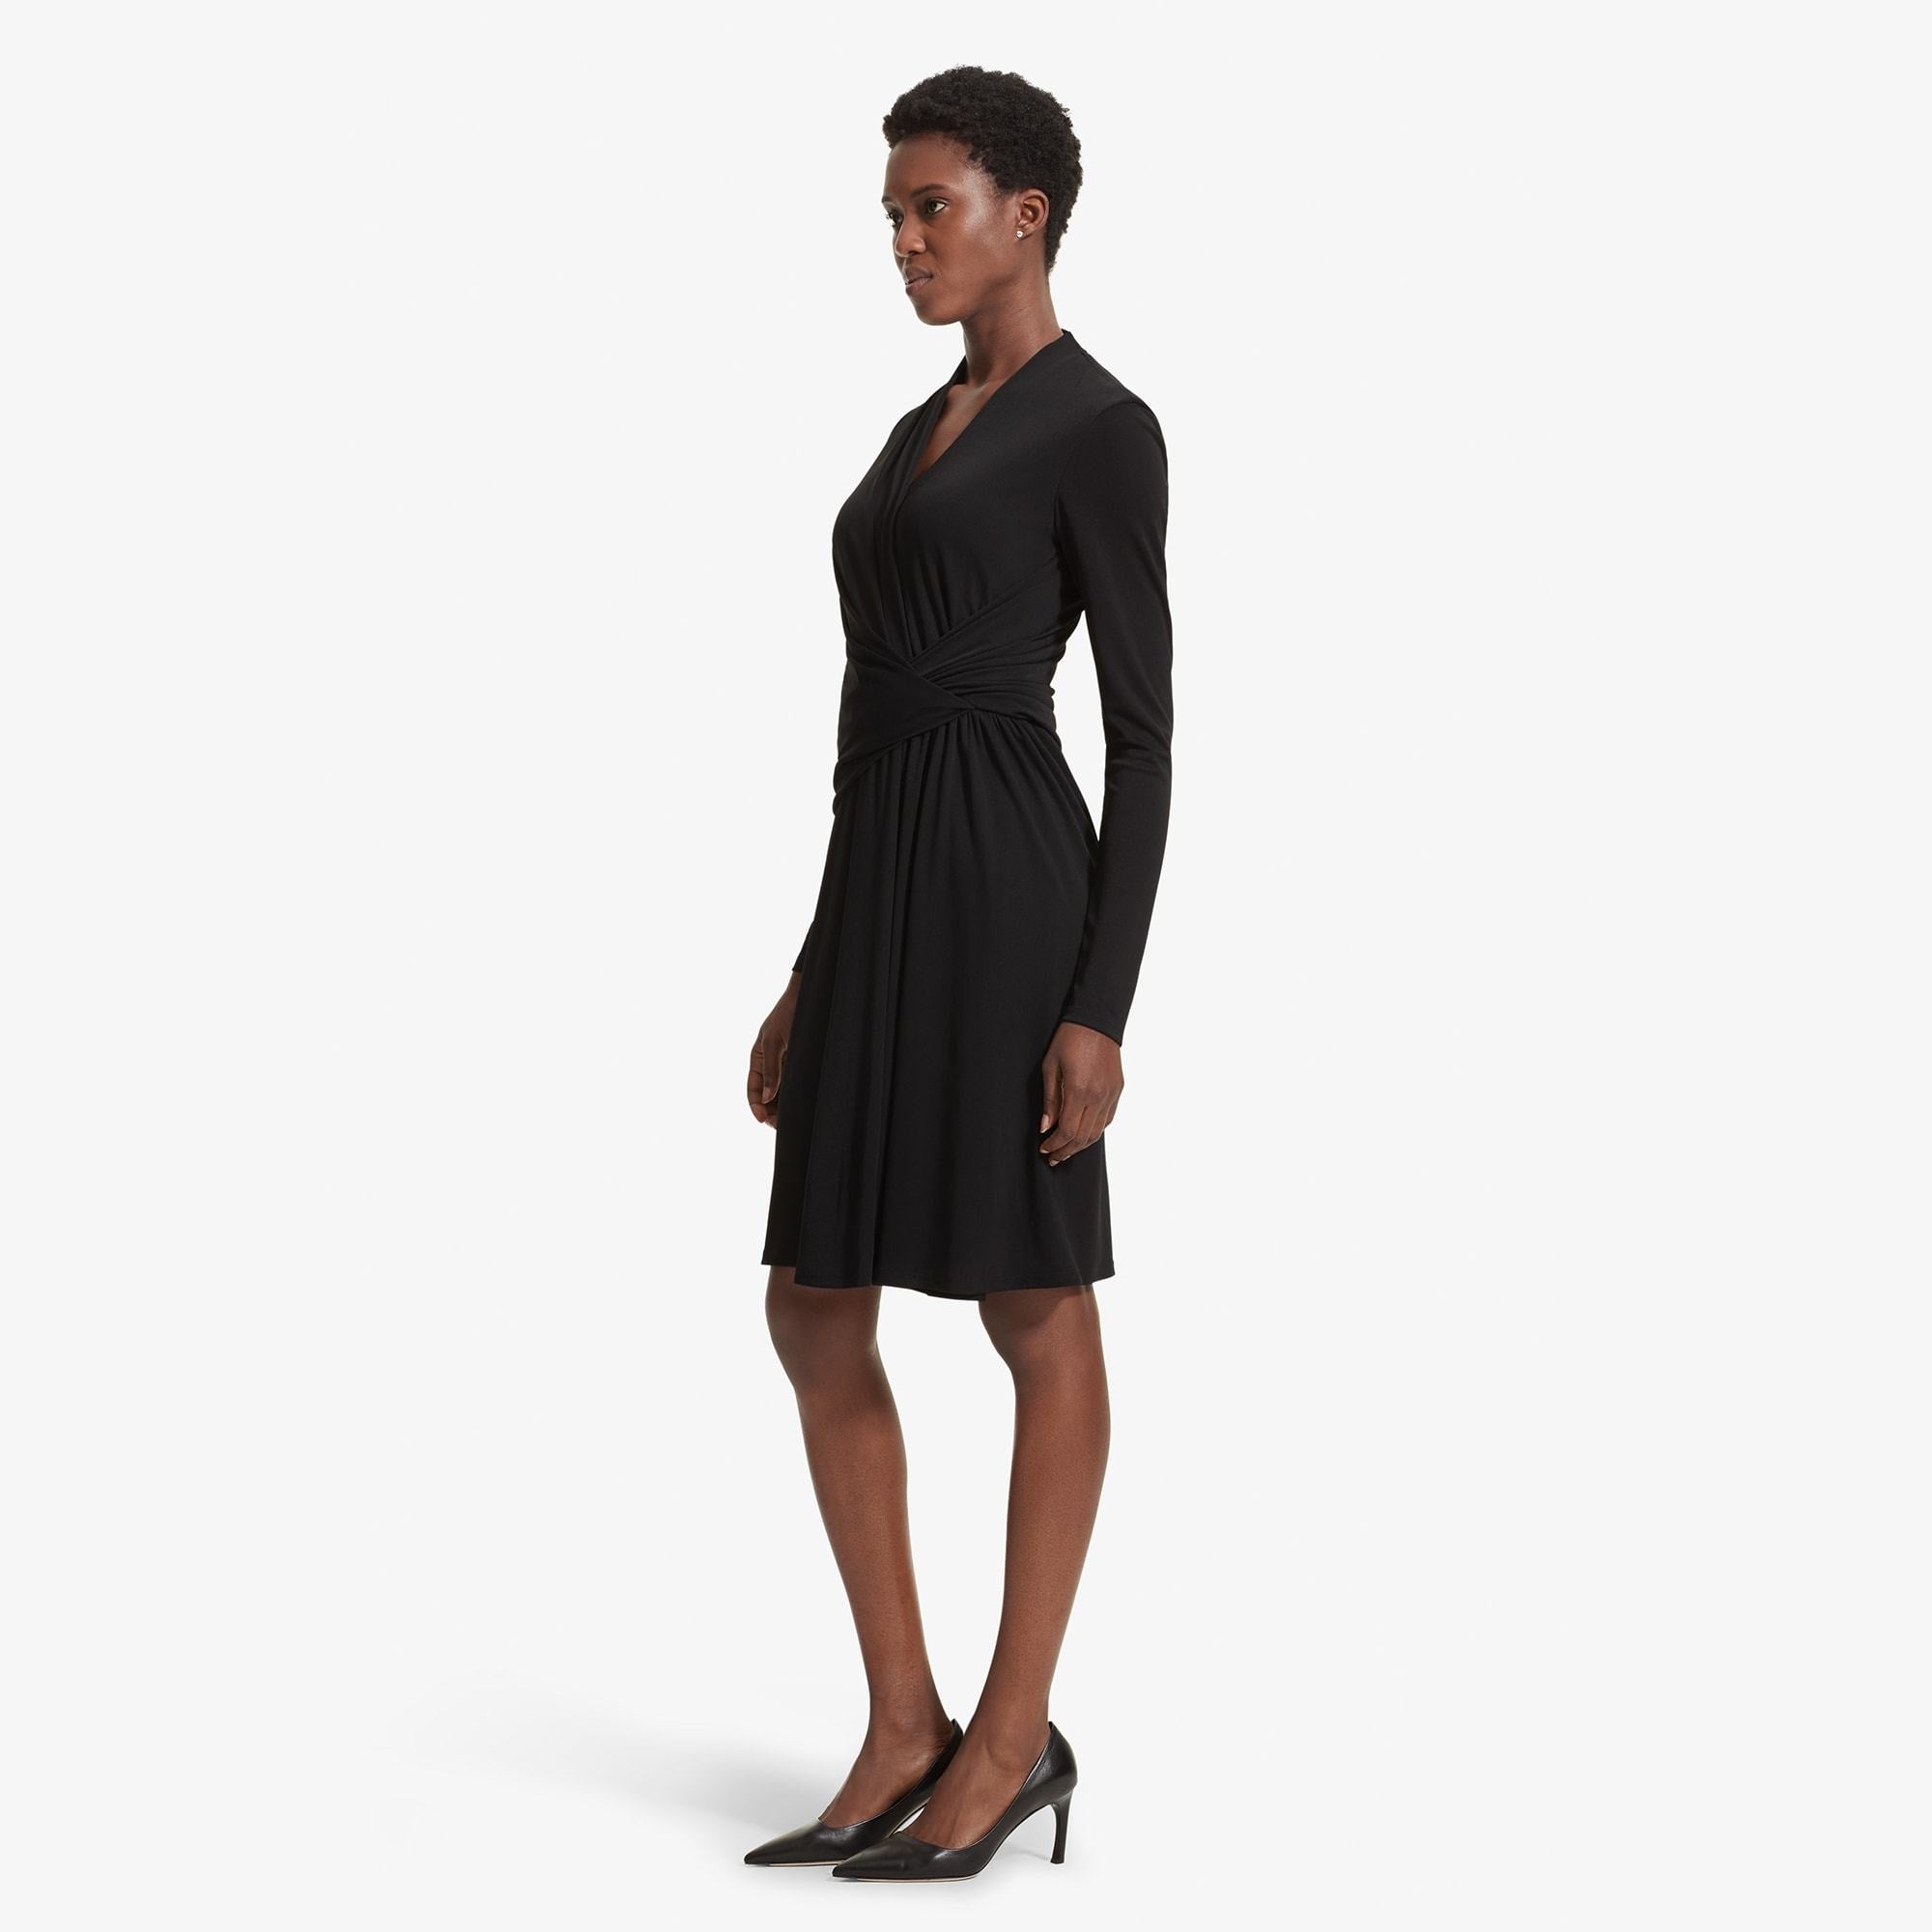 Side image of a woman standing wearing the Morgan dress in Black